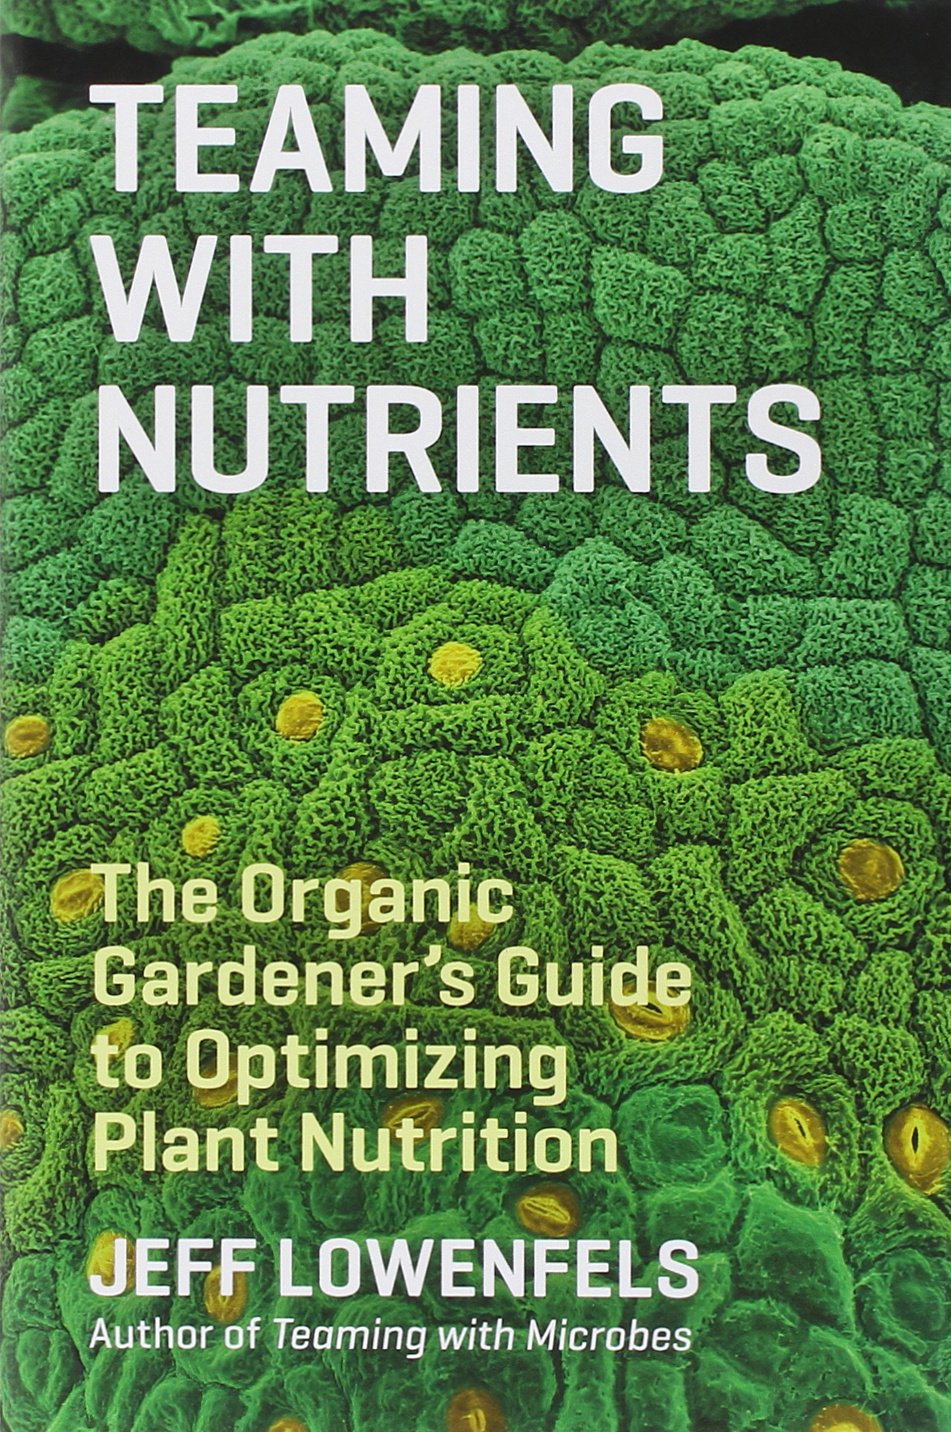 teaming-with-nutrients-the-organic-gardeners-guide-to-optimizing-plant-nutrition_3229014